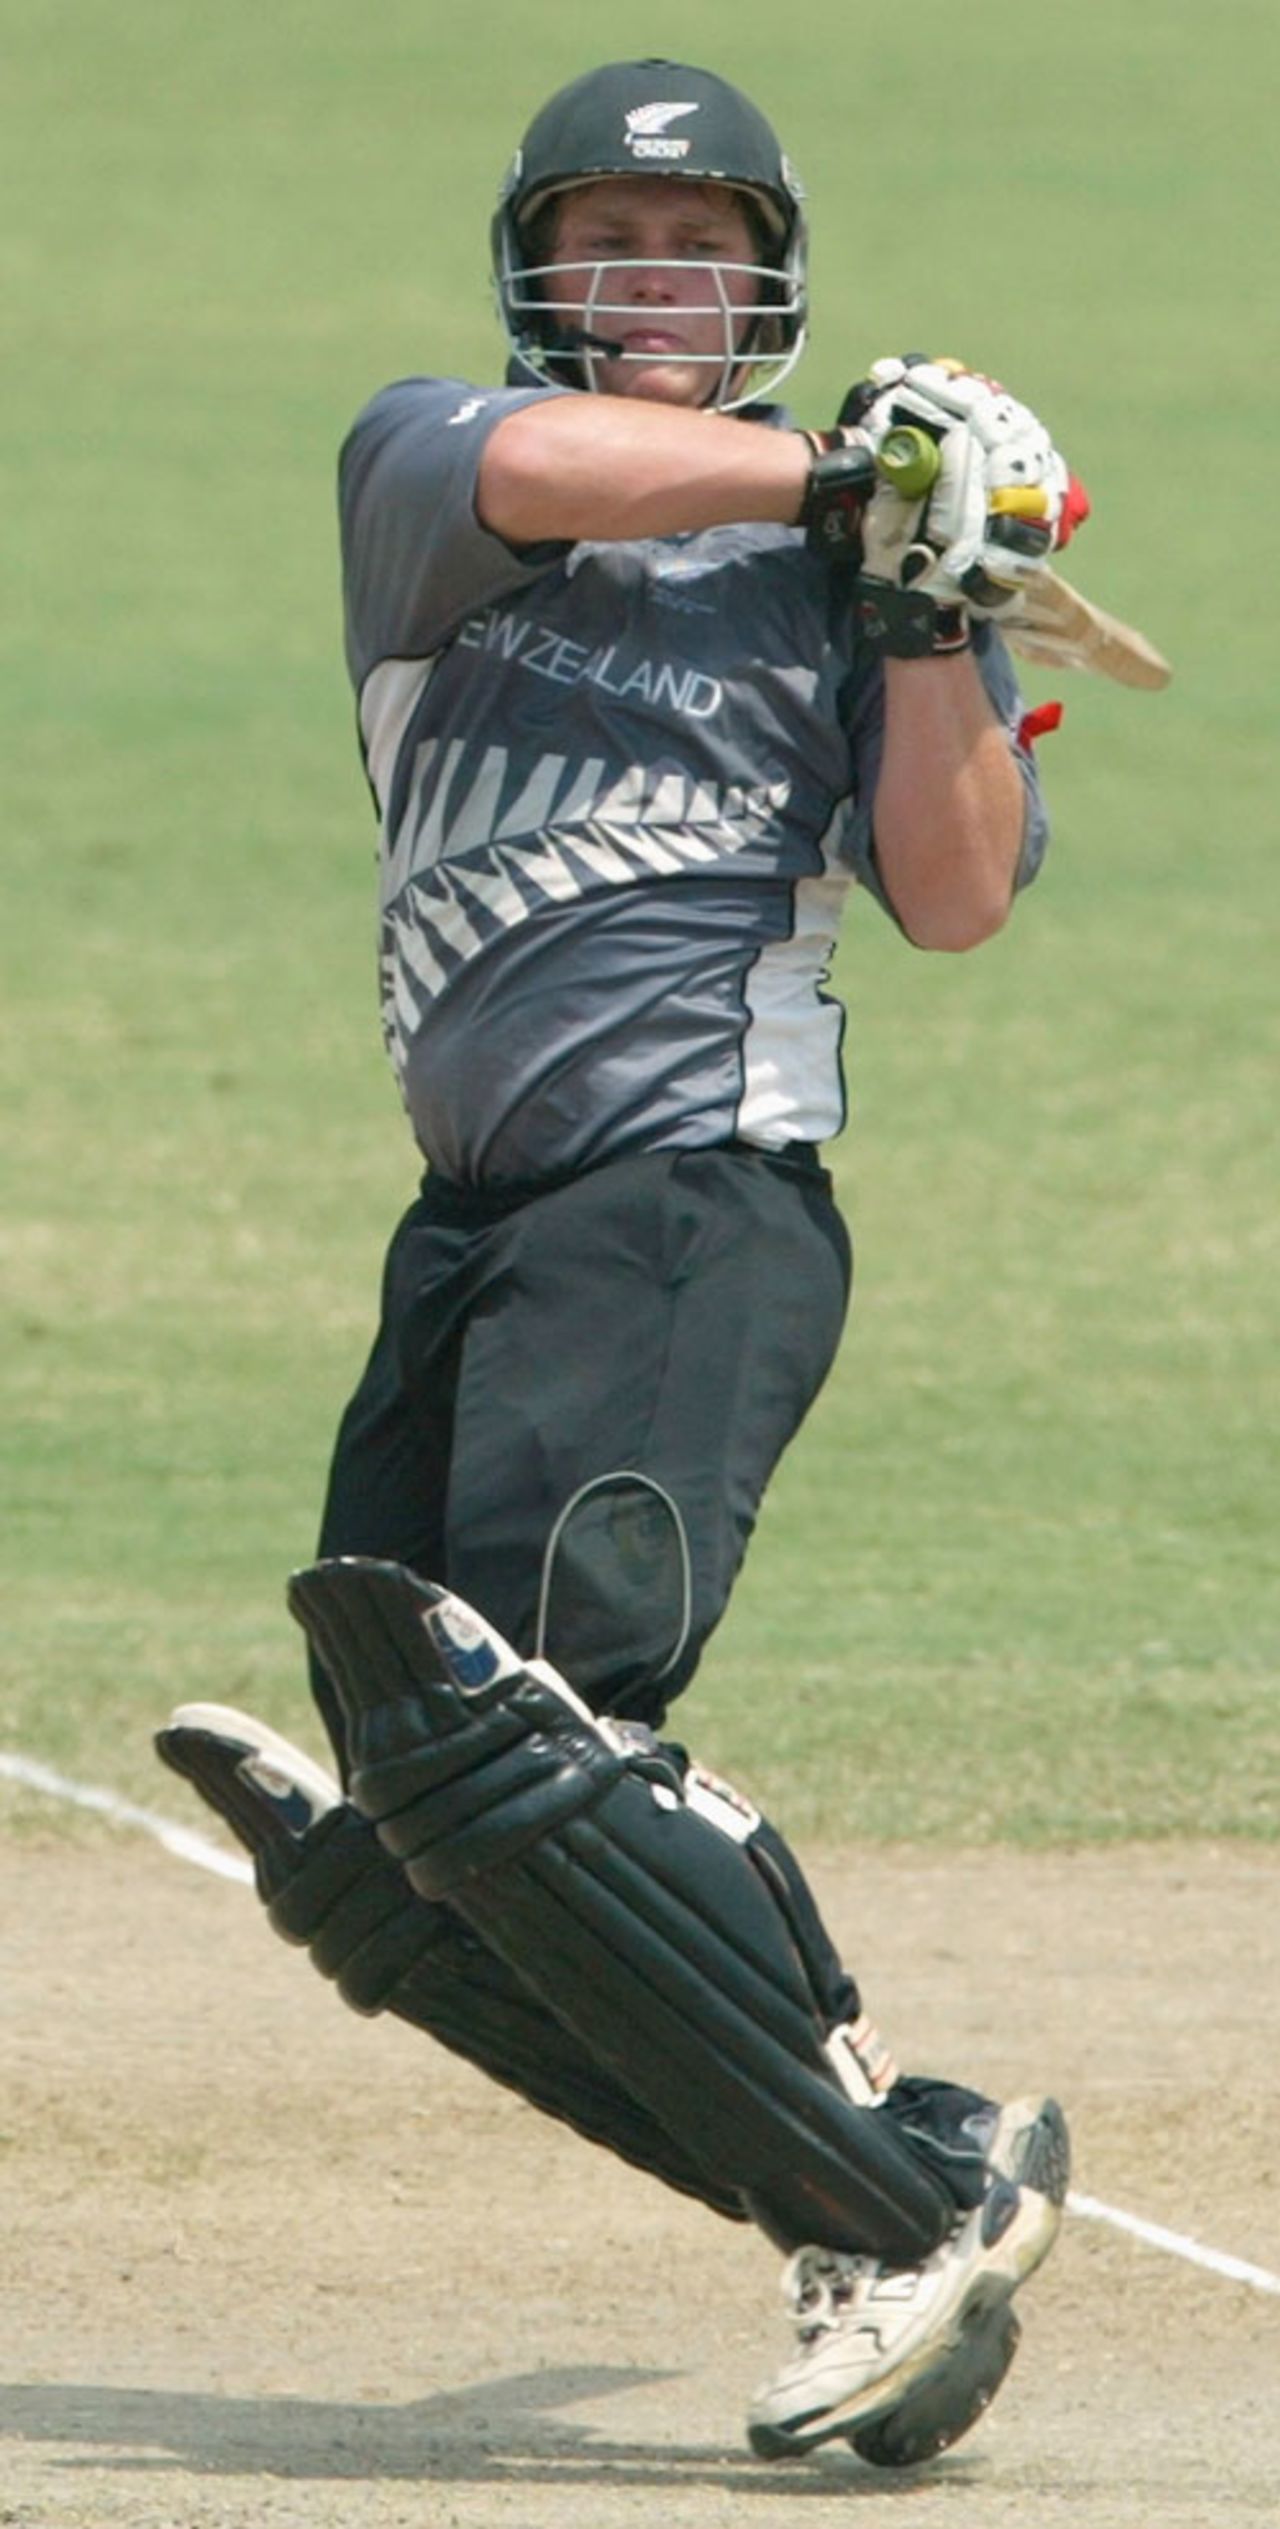 New Zealand's Kane Williamson hooks during the Under-19 World Cup semi-final against India, India v New Zealand, U-19 World Cup semi-final, Kinrara Cricket Ground, February 27, 2008 